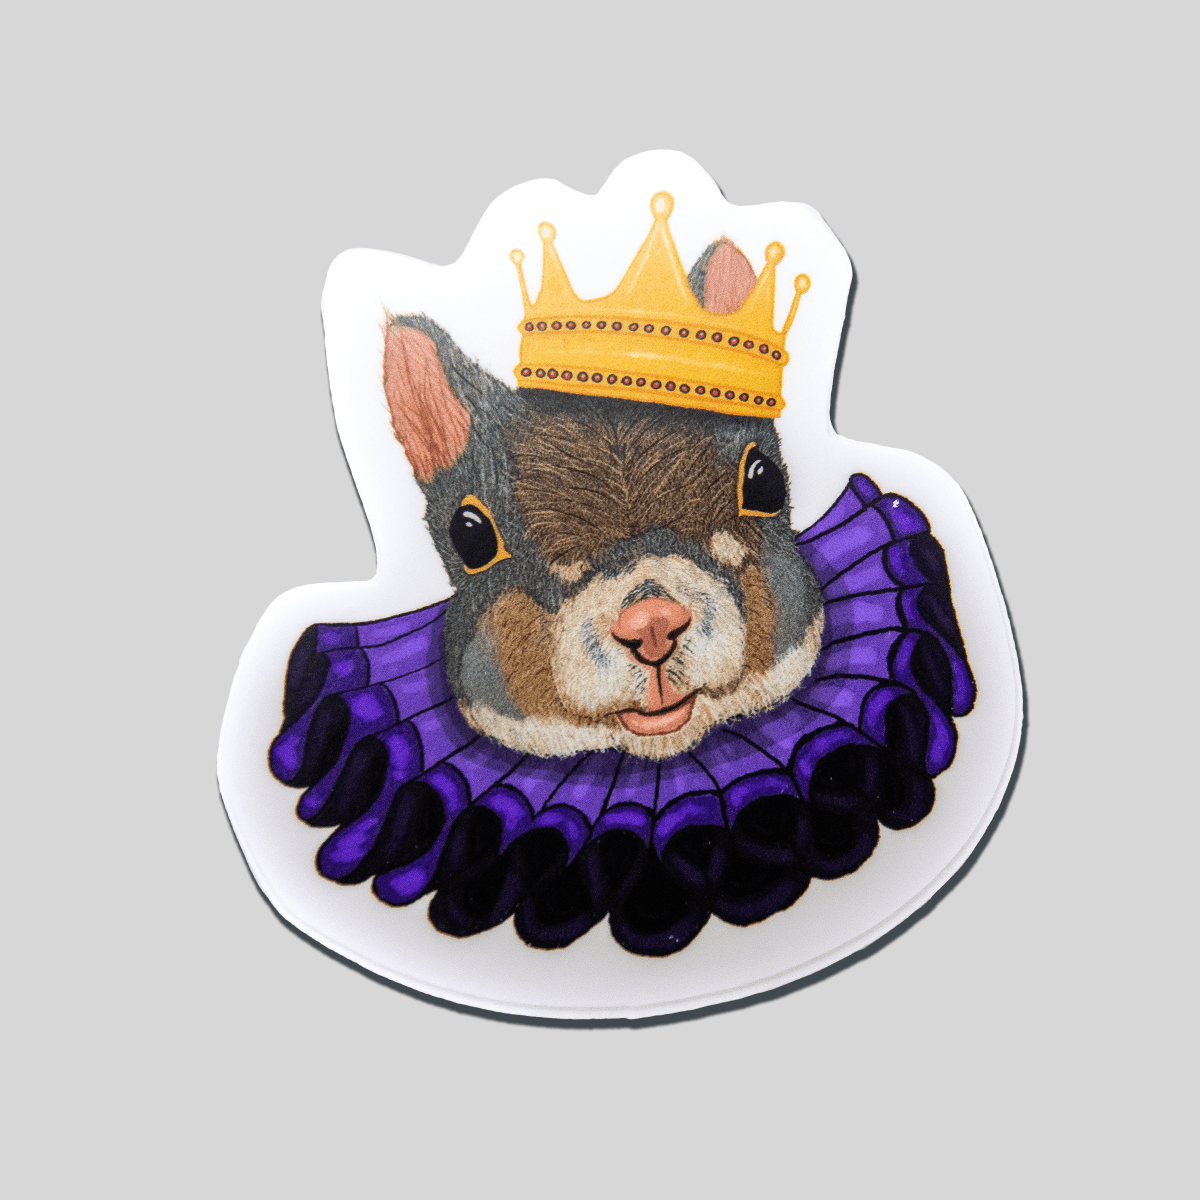 King Squirrel sticker over a gray background